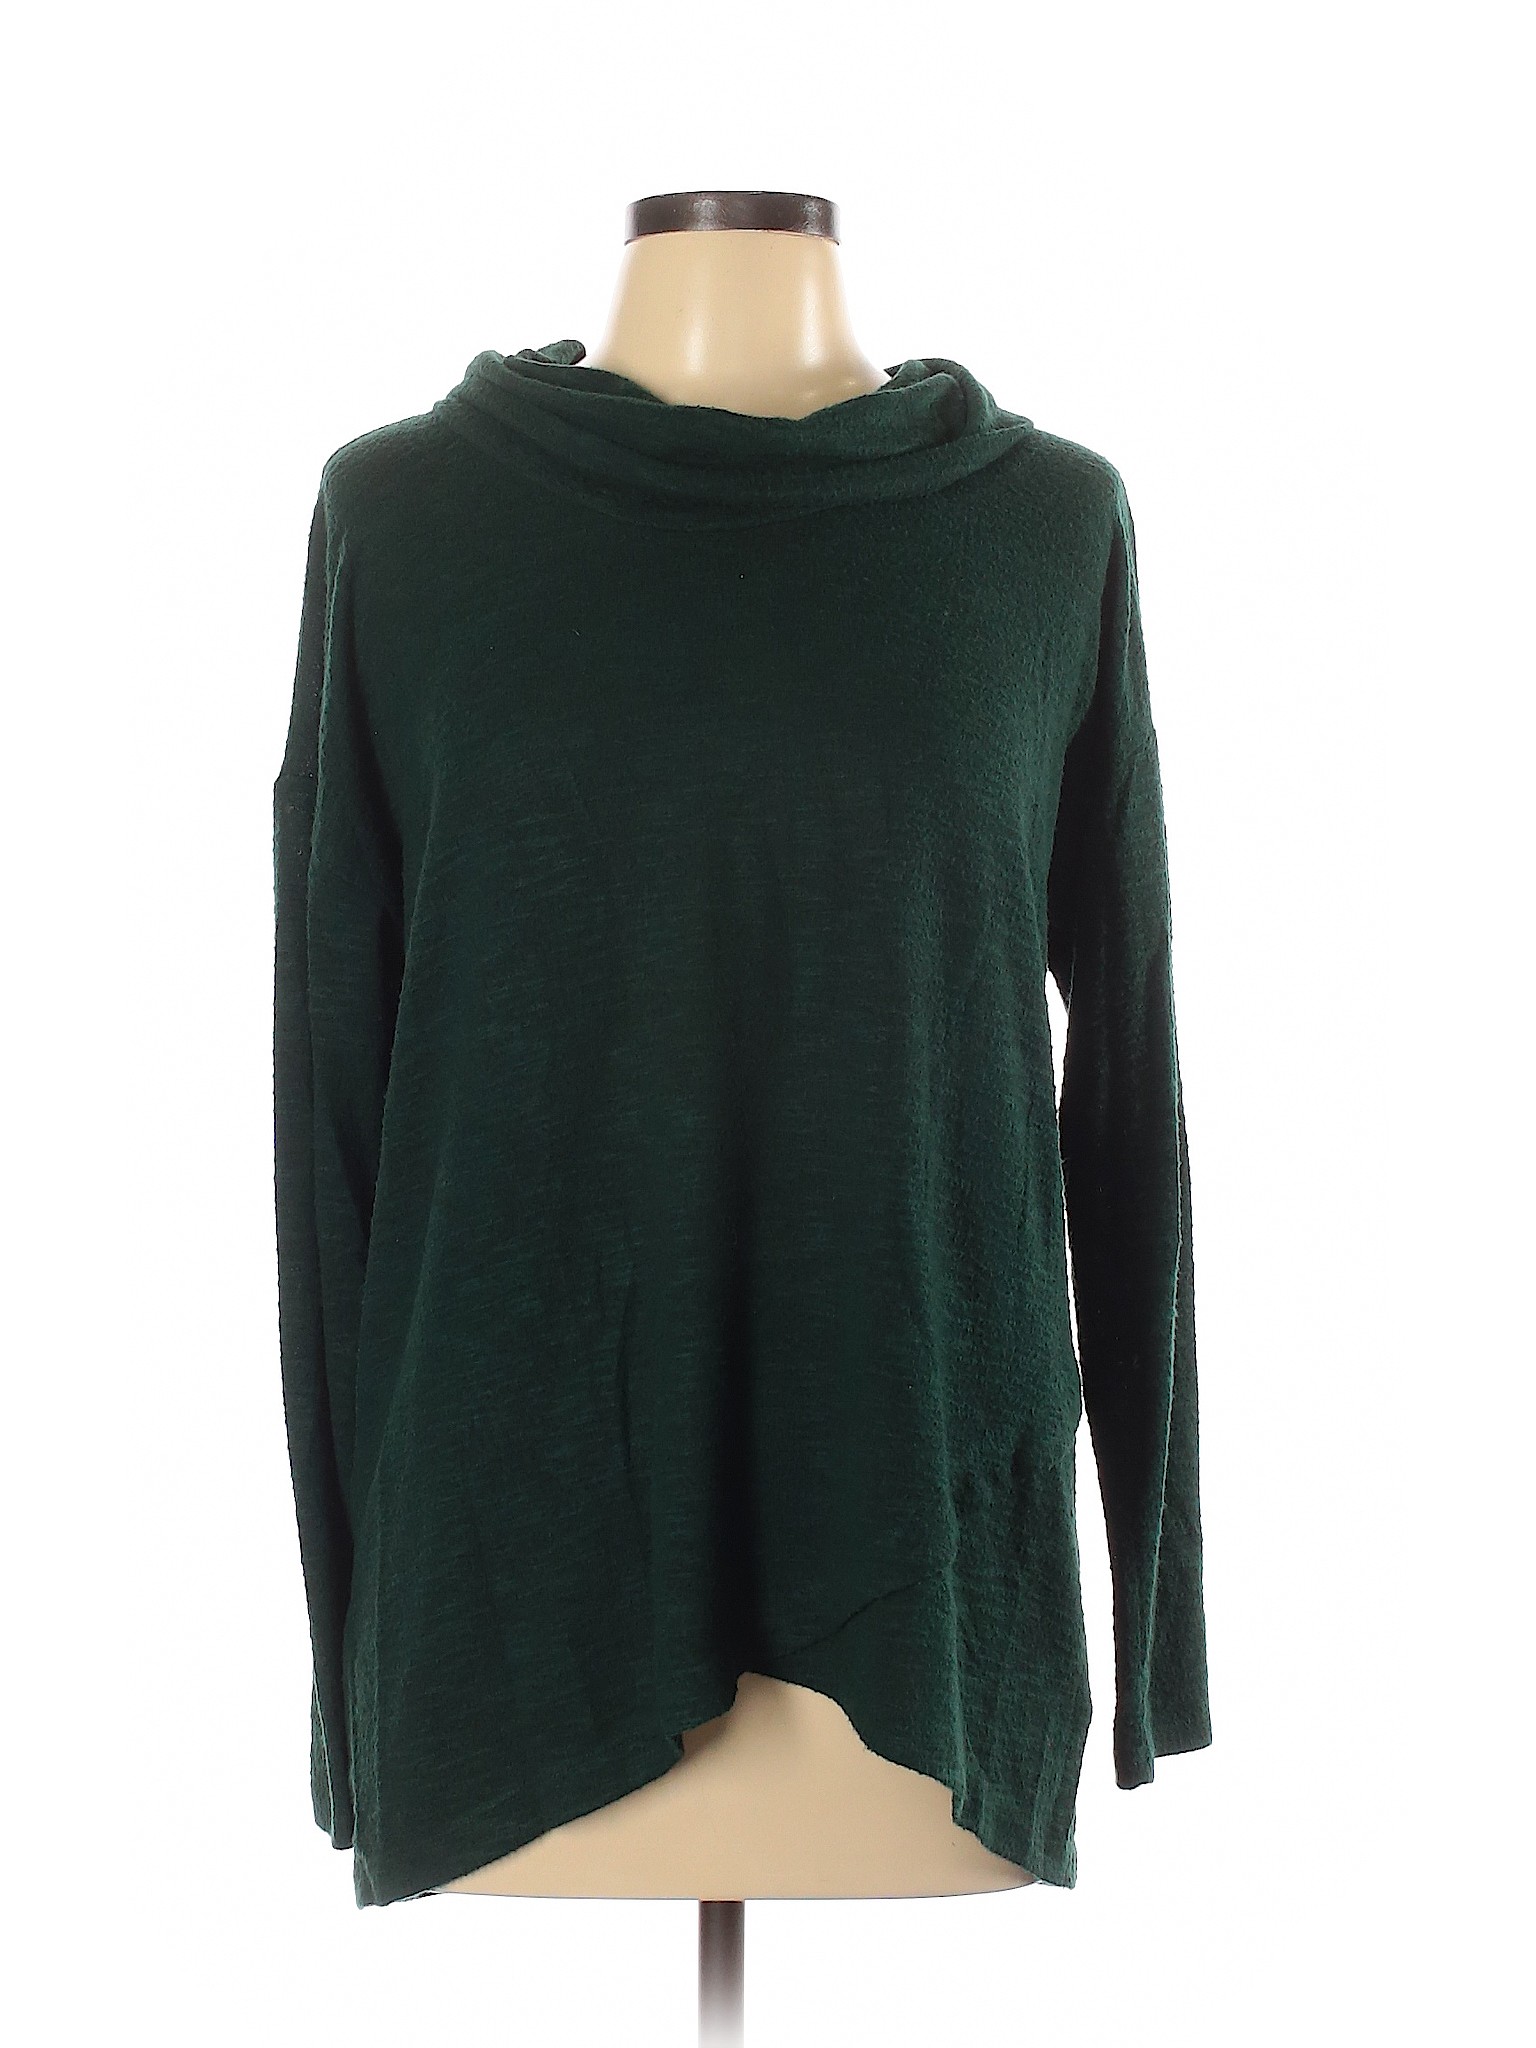 Maurices Women Green Pullover Sweater L | eBay